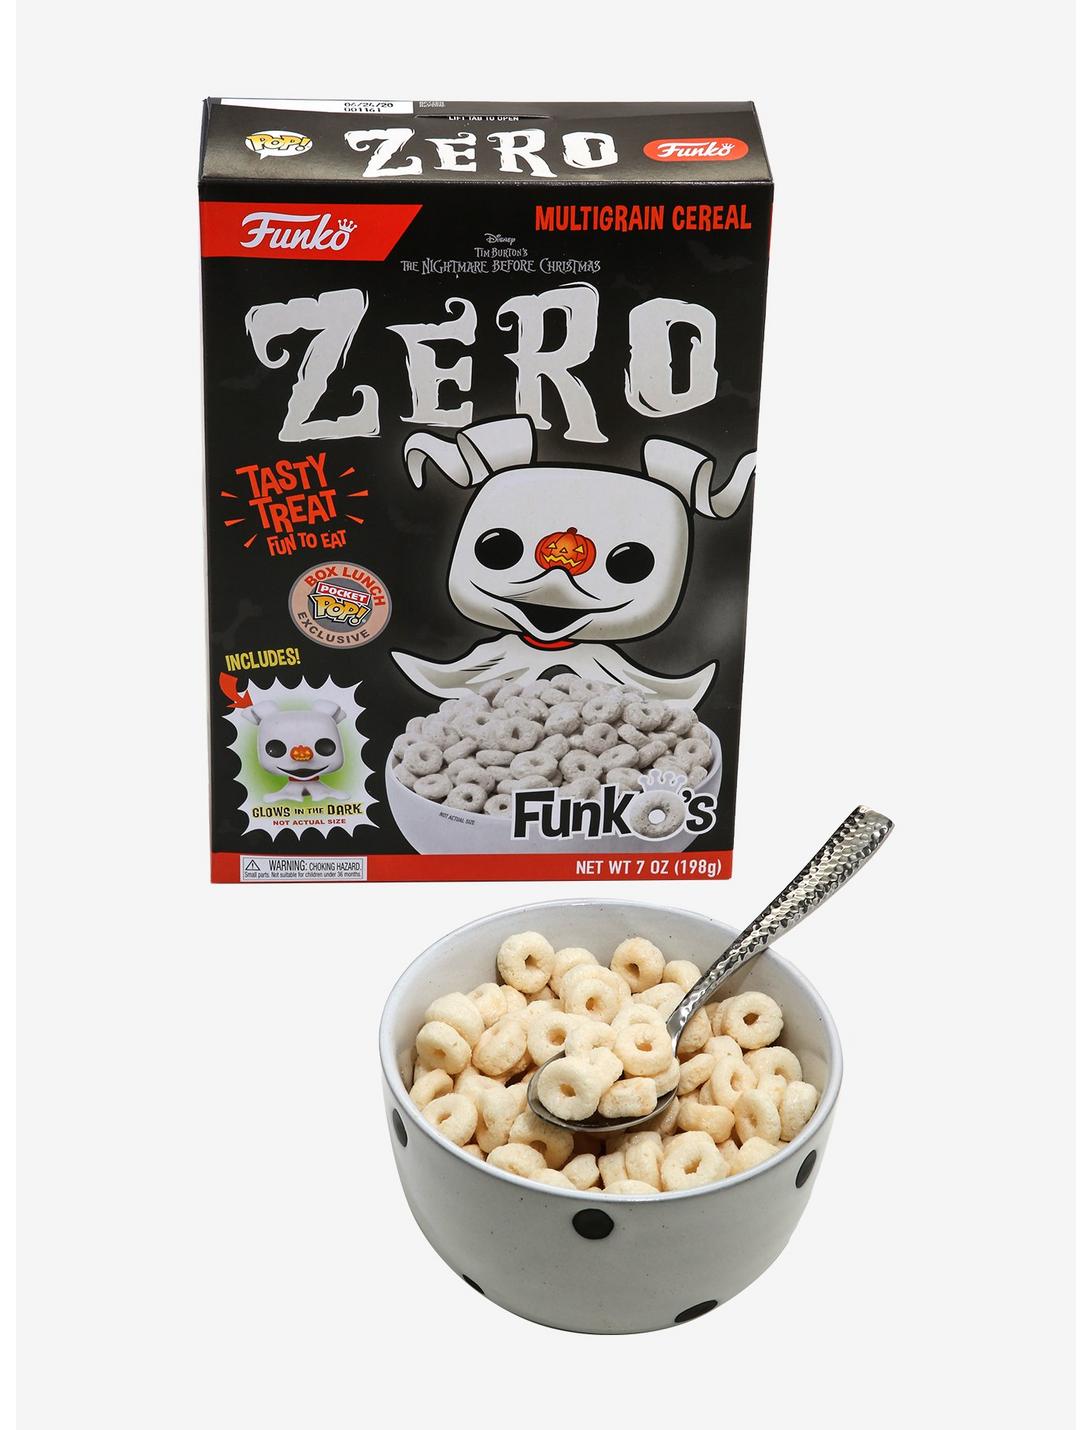 Funko Disney The Nightmare Before Christmas FunkO's Cereal with Pocket Pop! Glow-in-the-Dark Zero Cereal - BoxLunch Exclusive, , hi-res